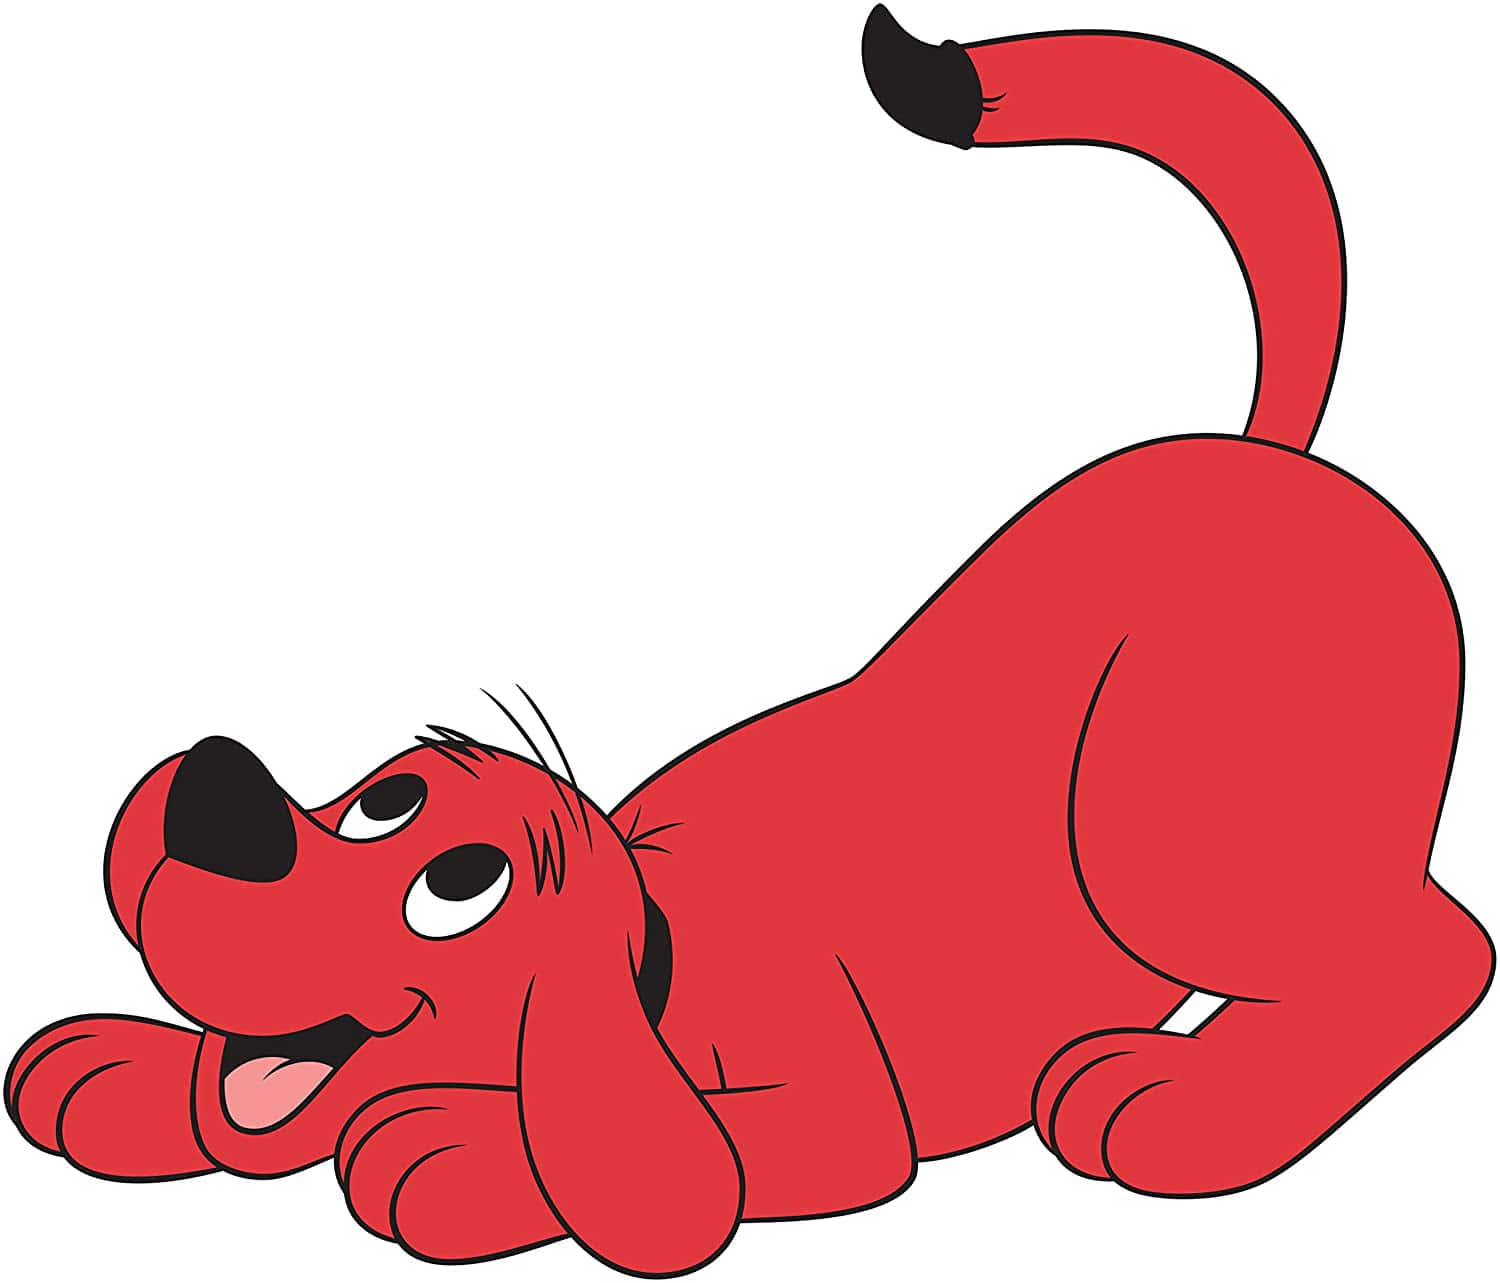 Clifford the Big Red Dog smiles joyously!